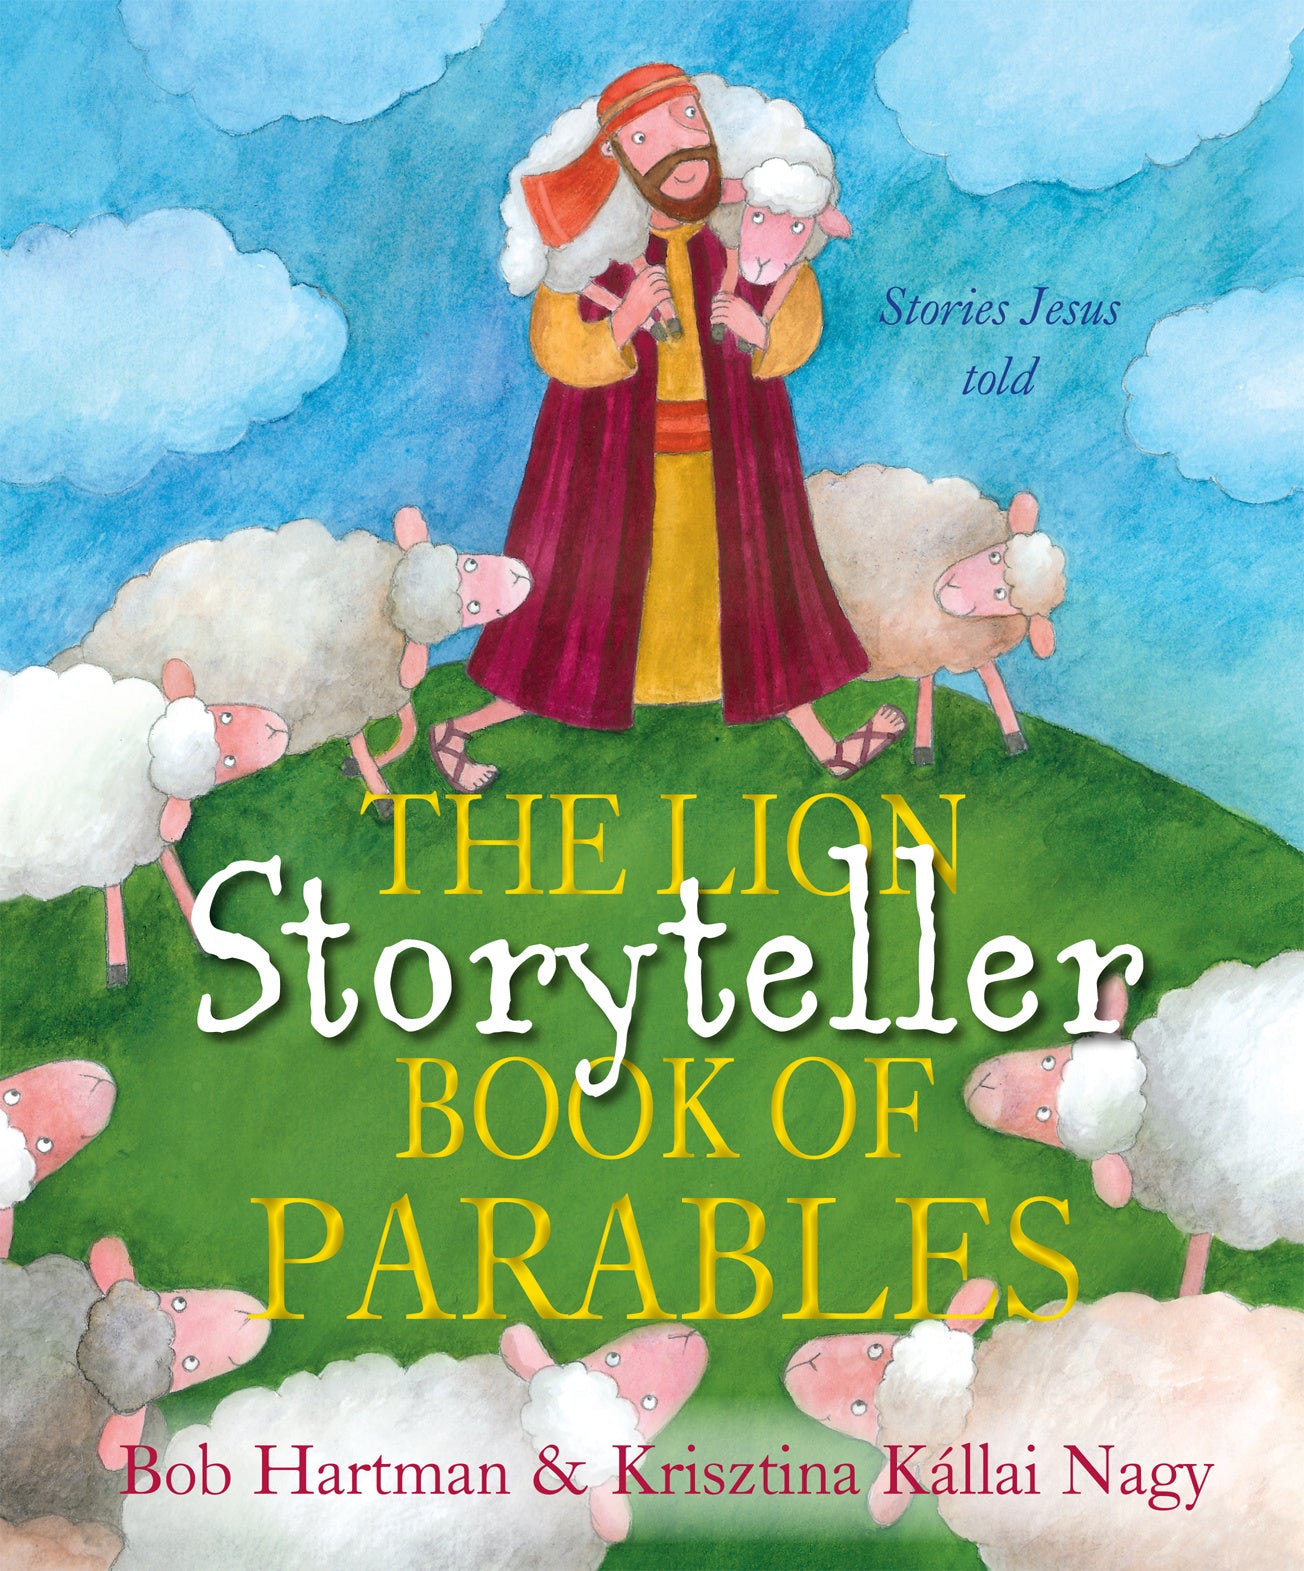 Image of The Lion Storyteller Book of Parables other